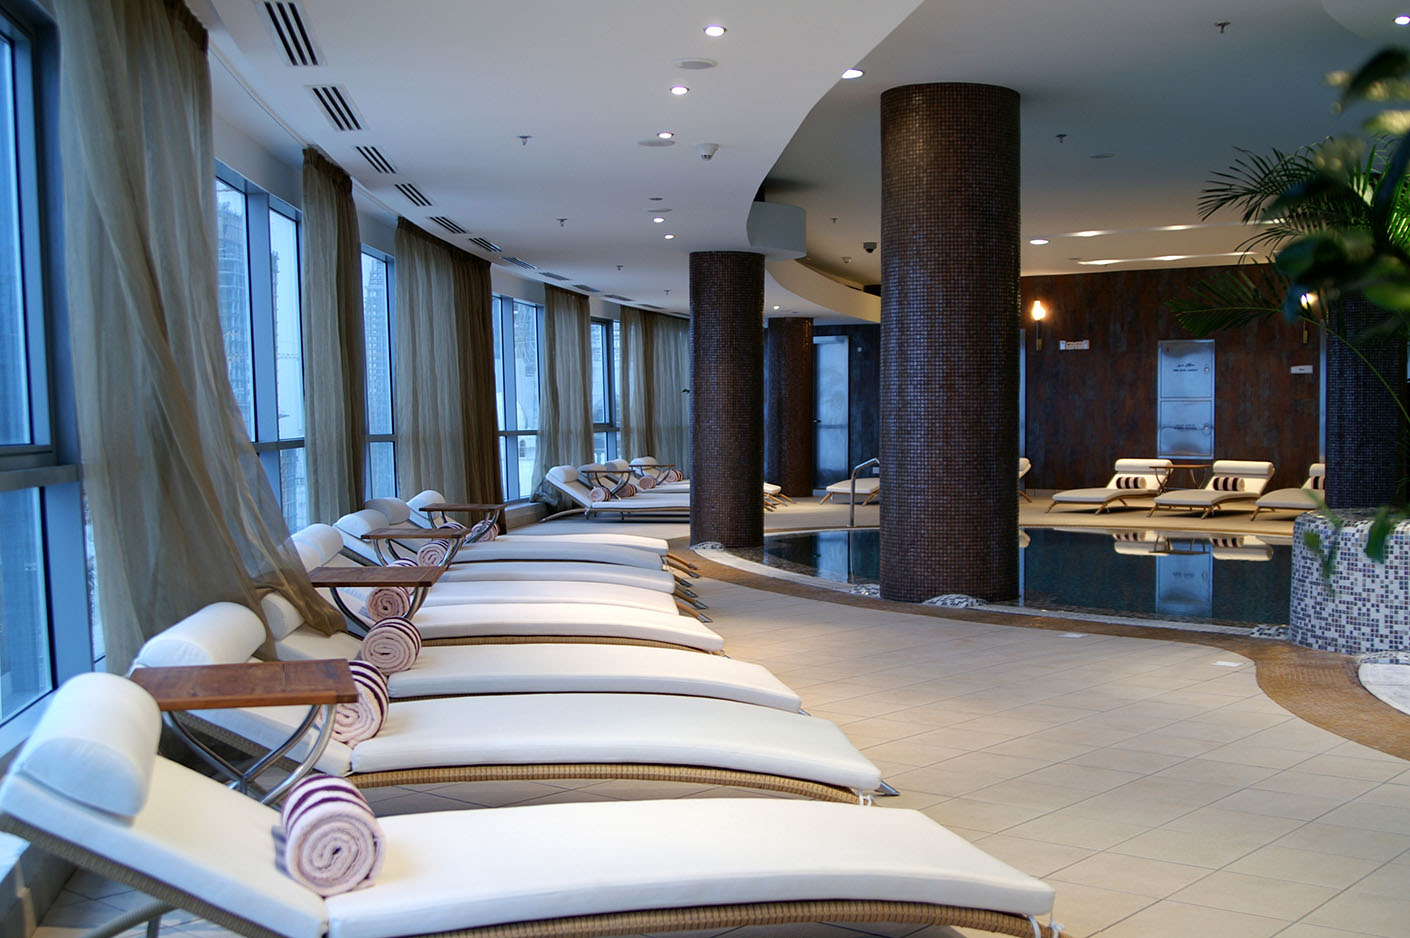 When to Visit an Aesthetic Center and Wellness Spa